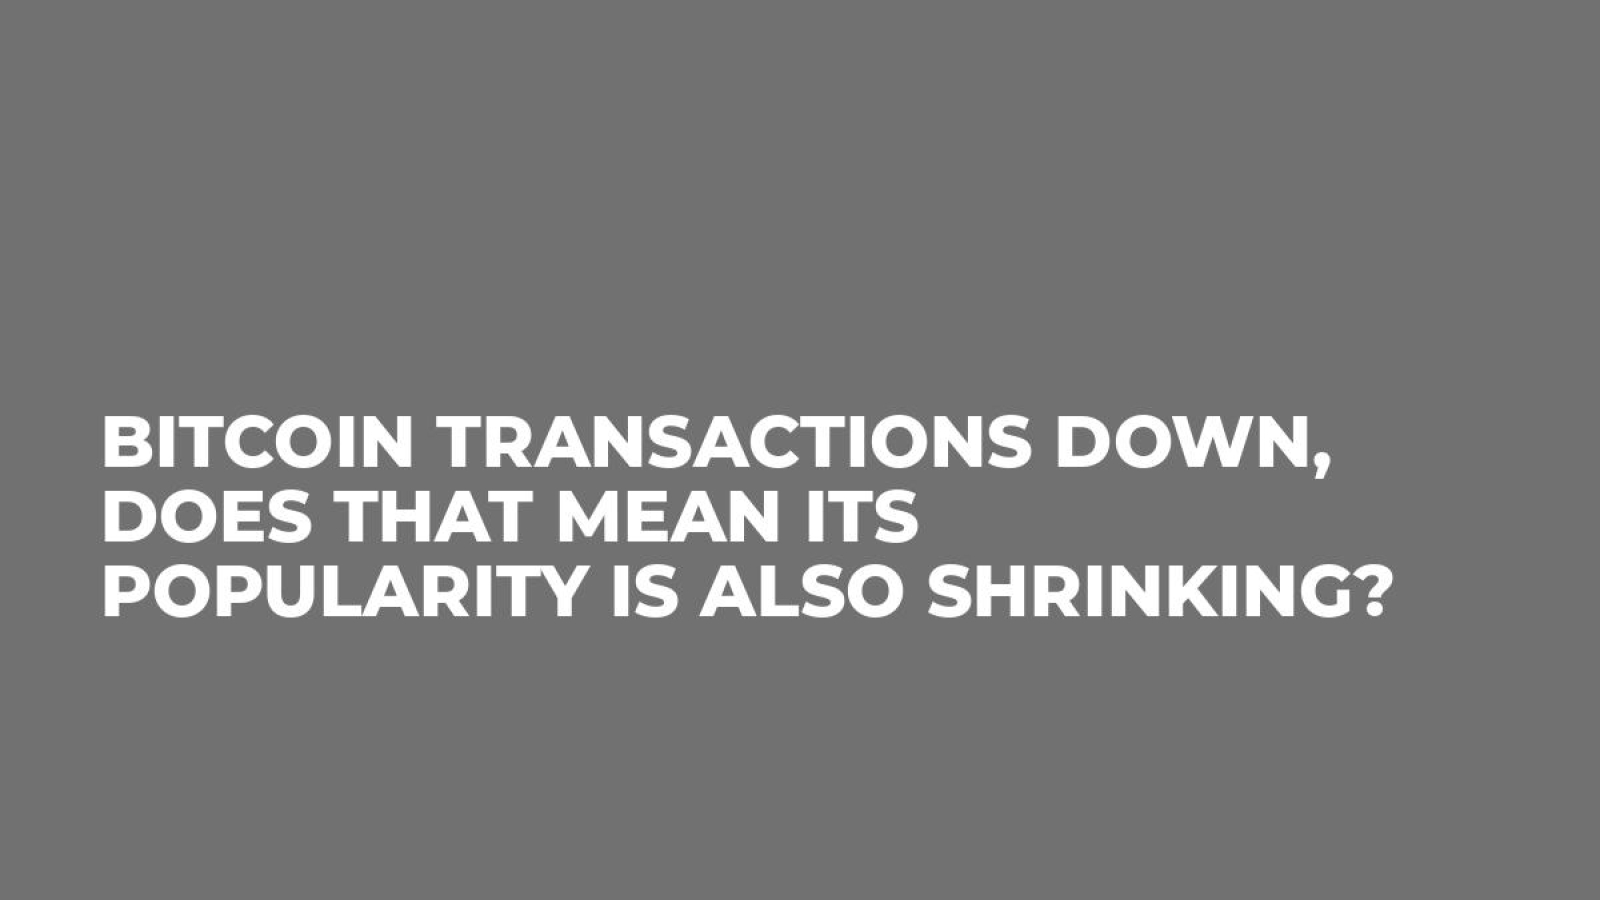 Bitcoin Transactions Down, Does That Mean its Popularity is Also Shrinking?